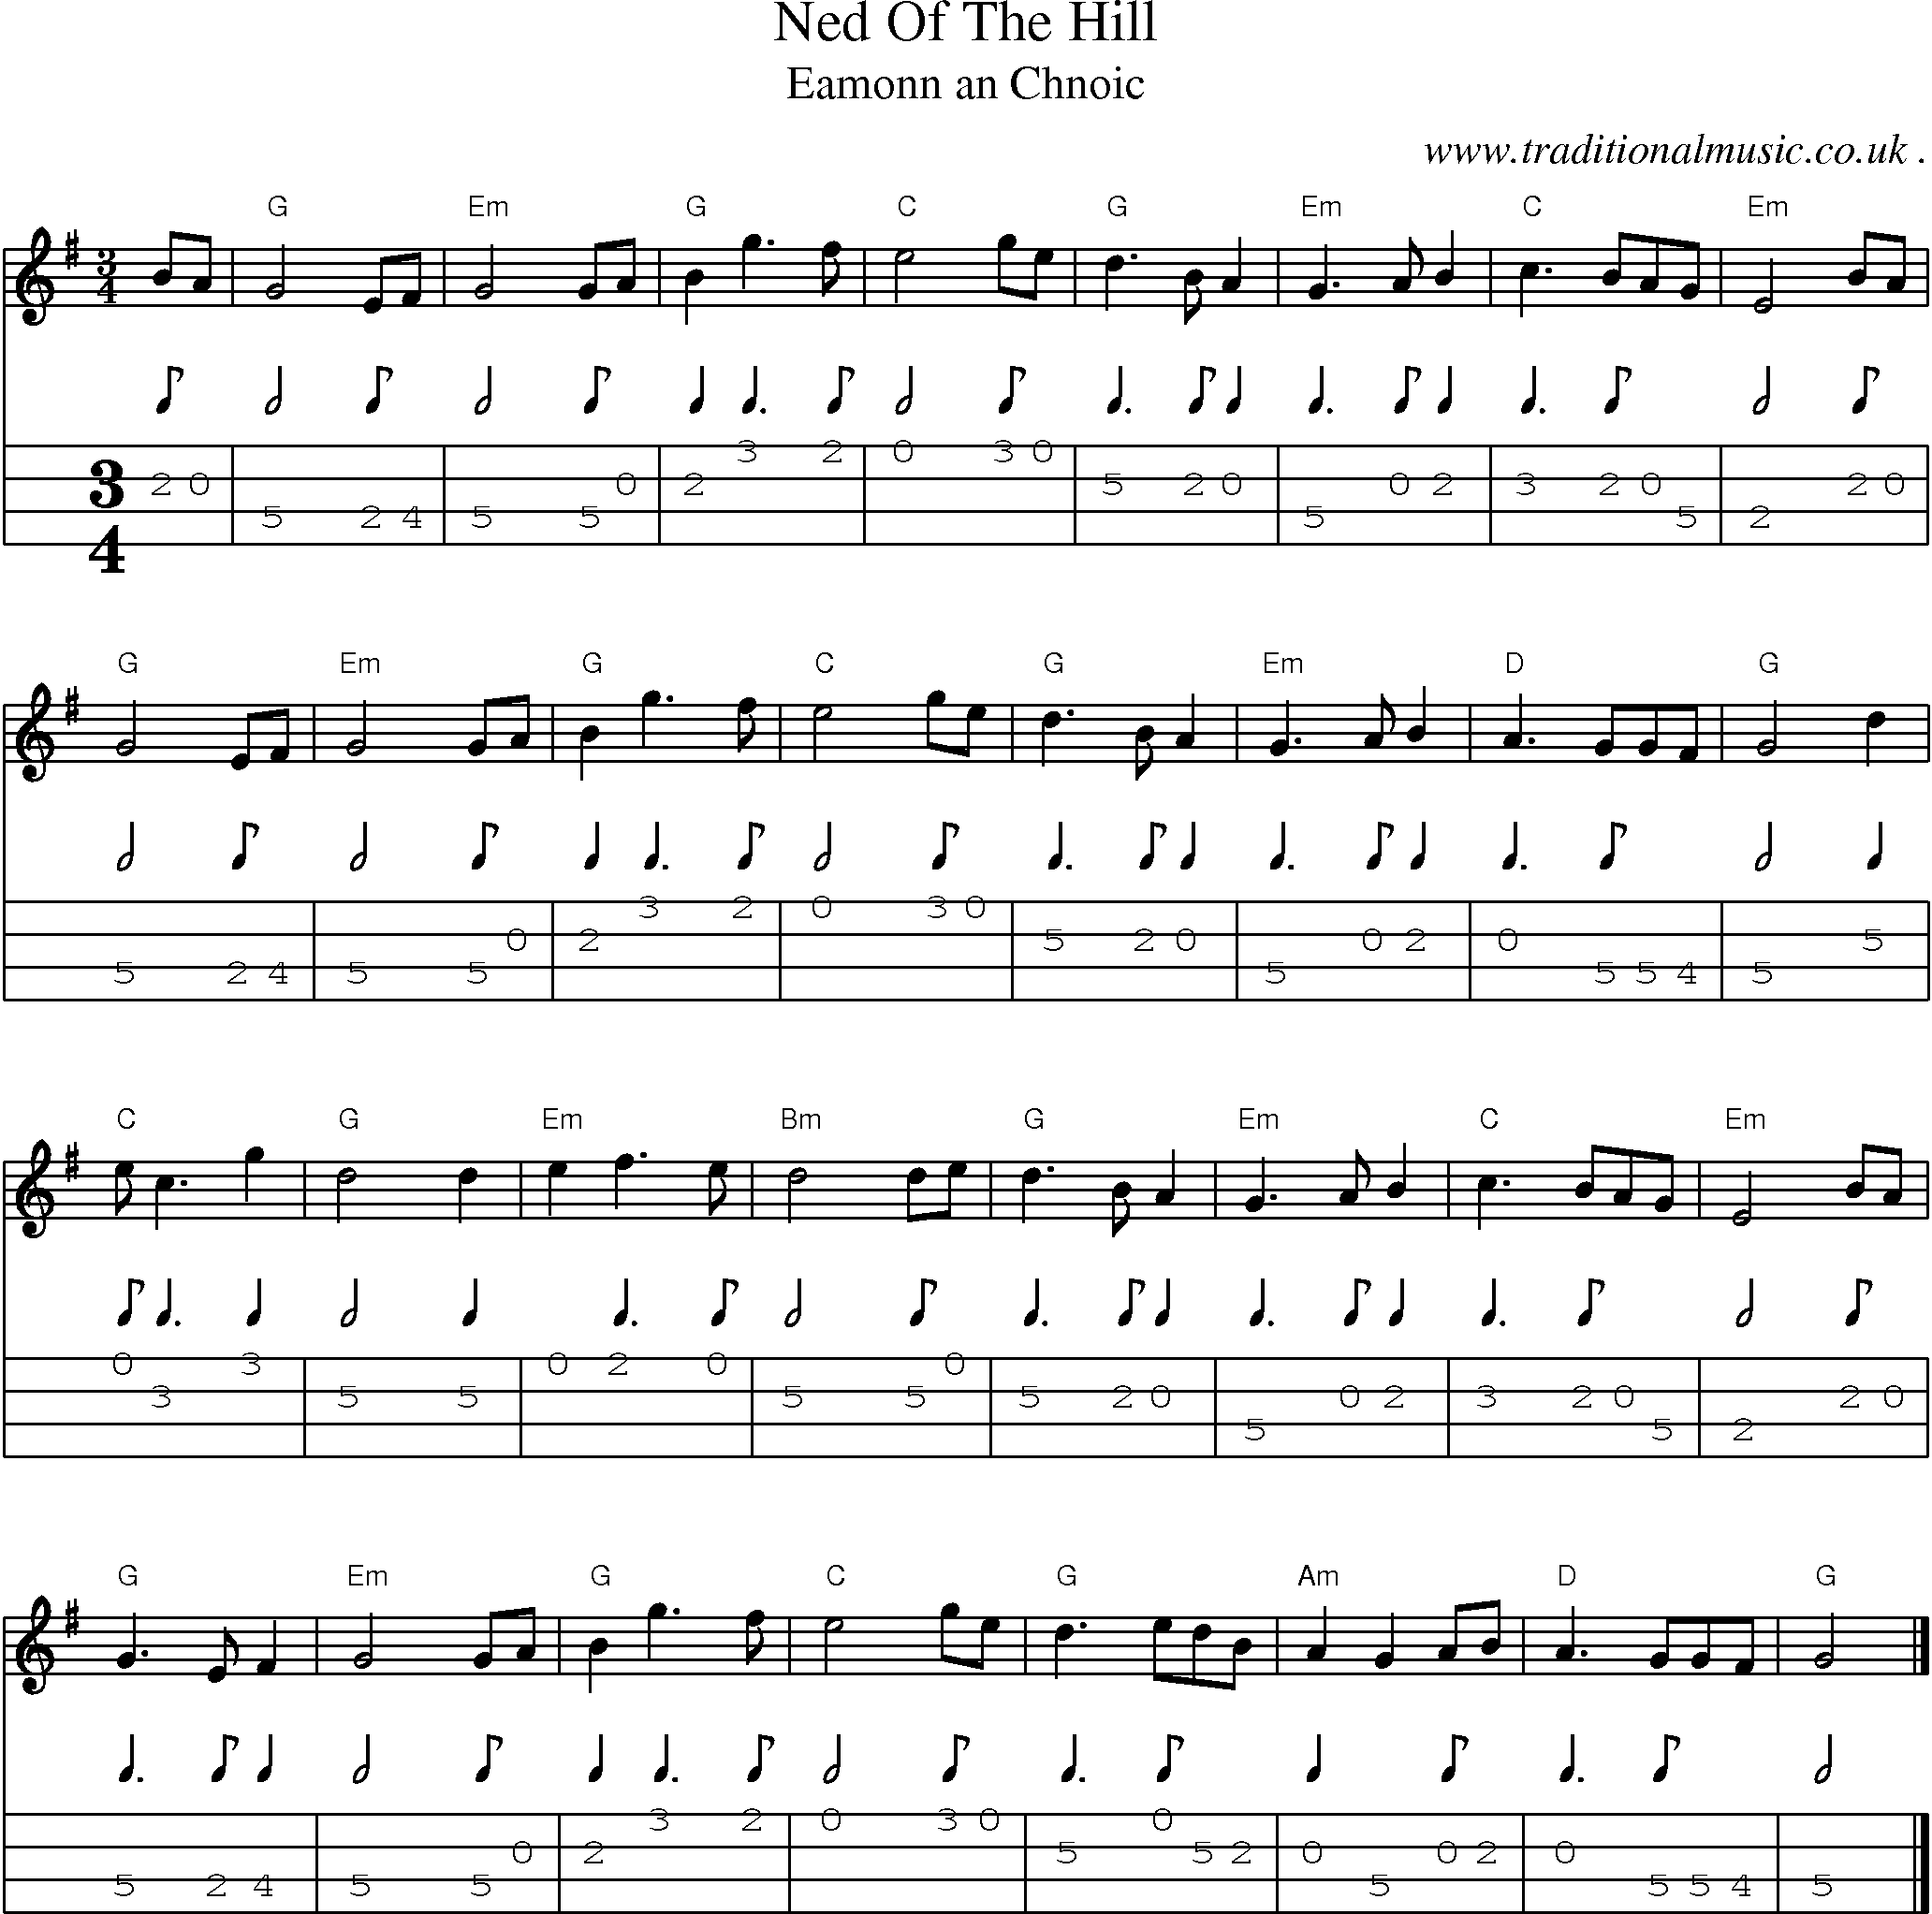 Music Score and Guitar Tabs for Ned Of The Hill